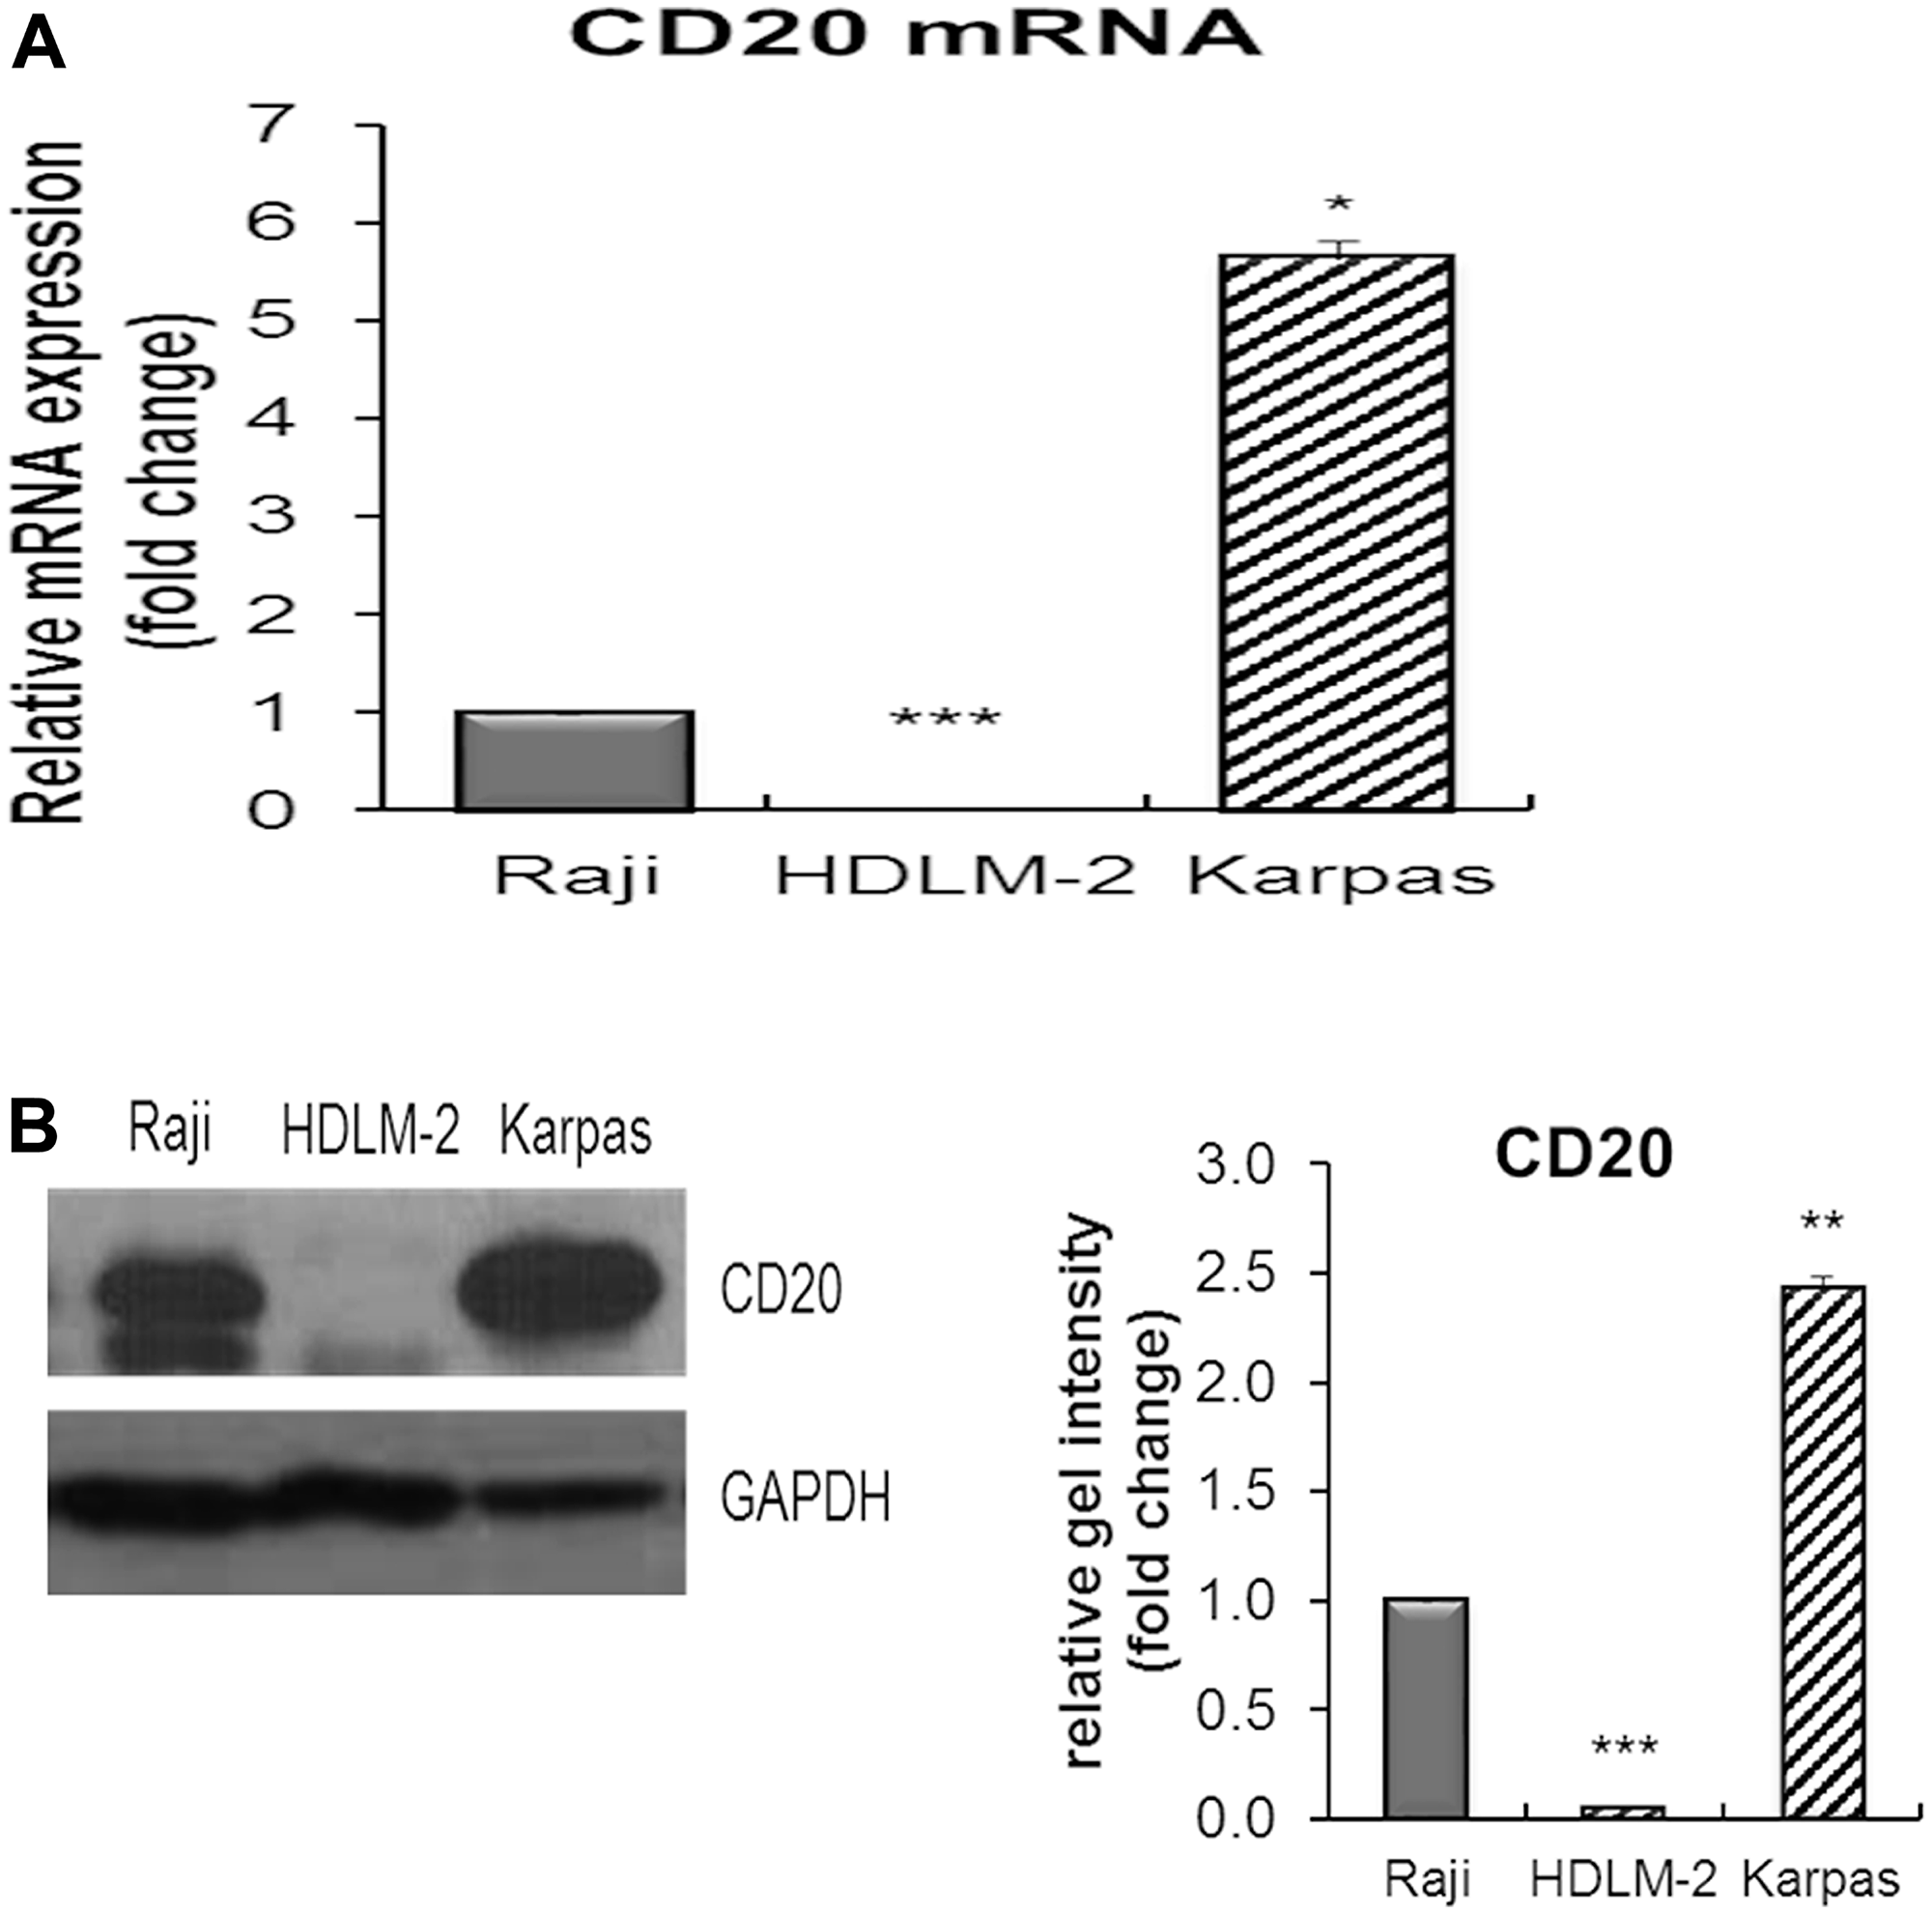 The expression of CD20 mRNA and protein in Karpas-1106 PMBL cells.